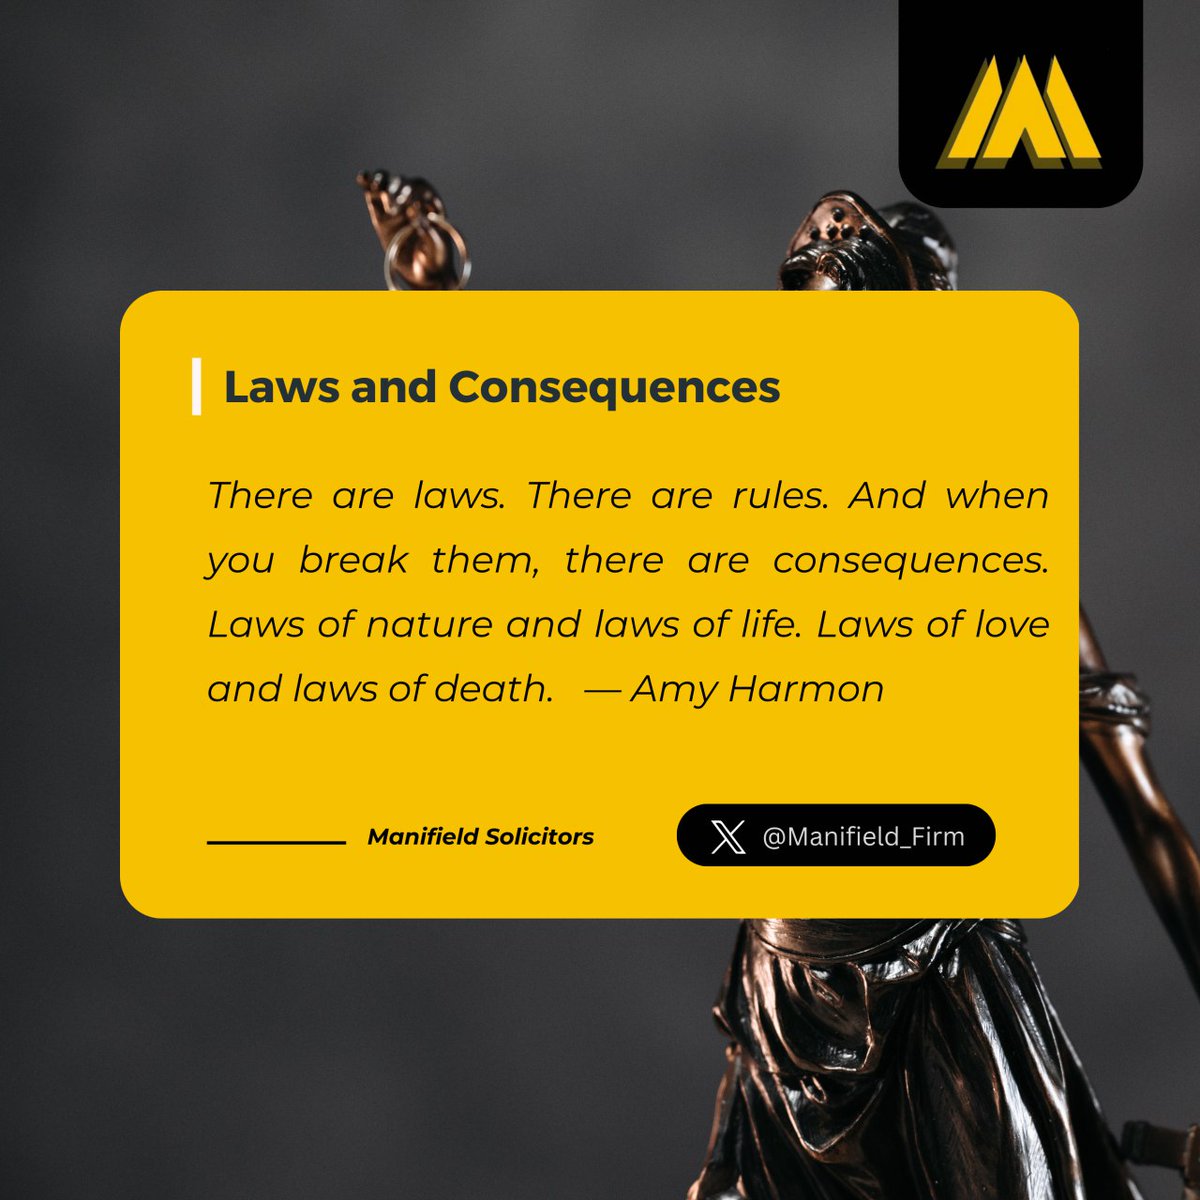 Explore the Boundaries: Laws shape our world, guiding us through the complexities of life. Join us at Manifield Solicitors as we navigate the intricate web of legalities.

#ManifieldSolicitors #LegalInsights #LawAndOrder #RulesAndConsequences #LegalWorld #ExploreTheLaw #LegalLife